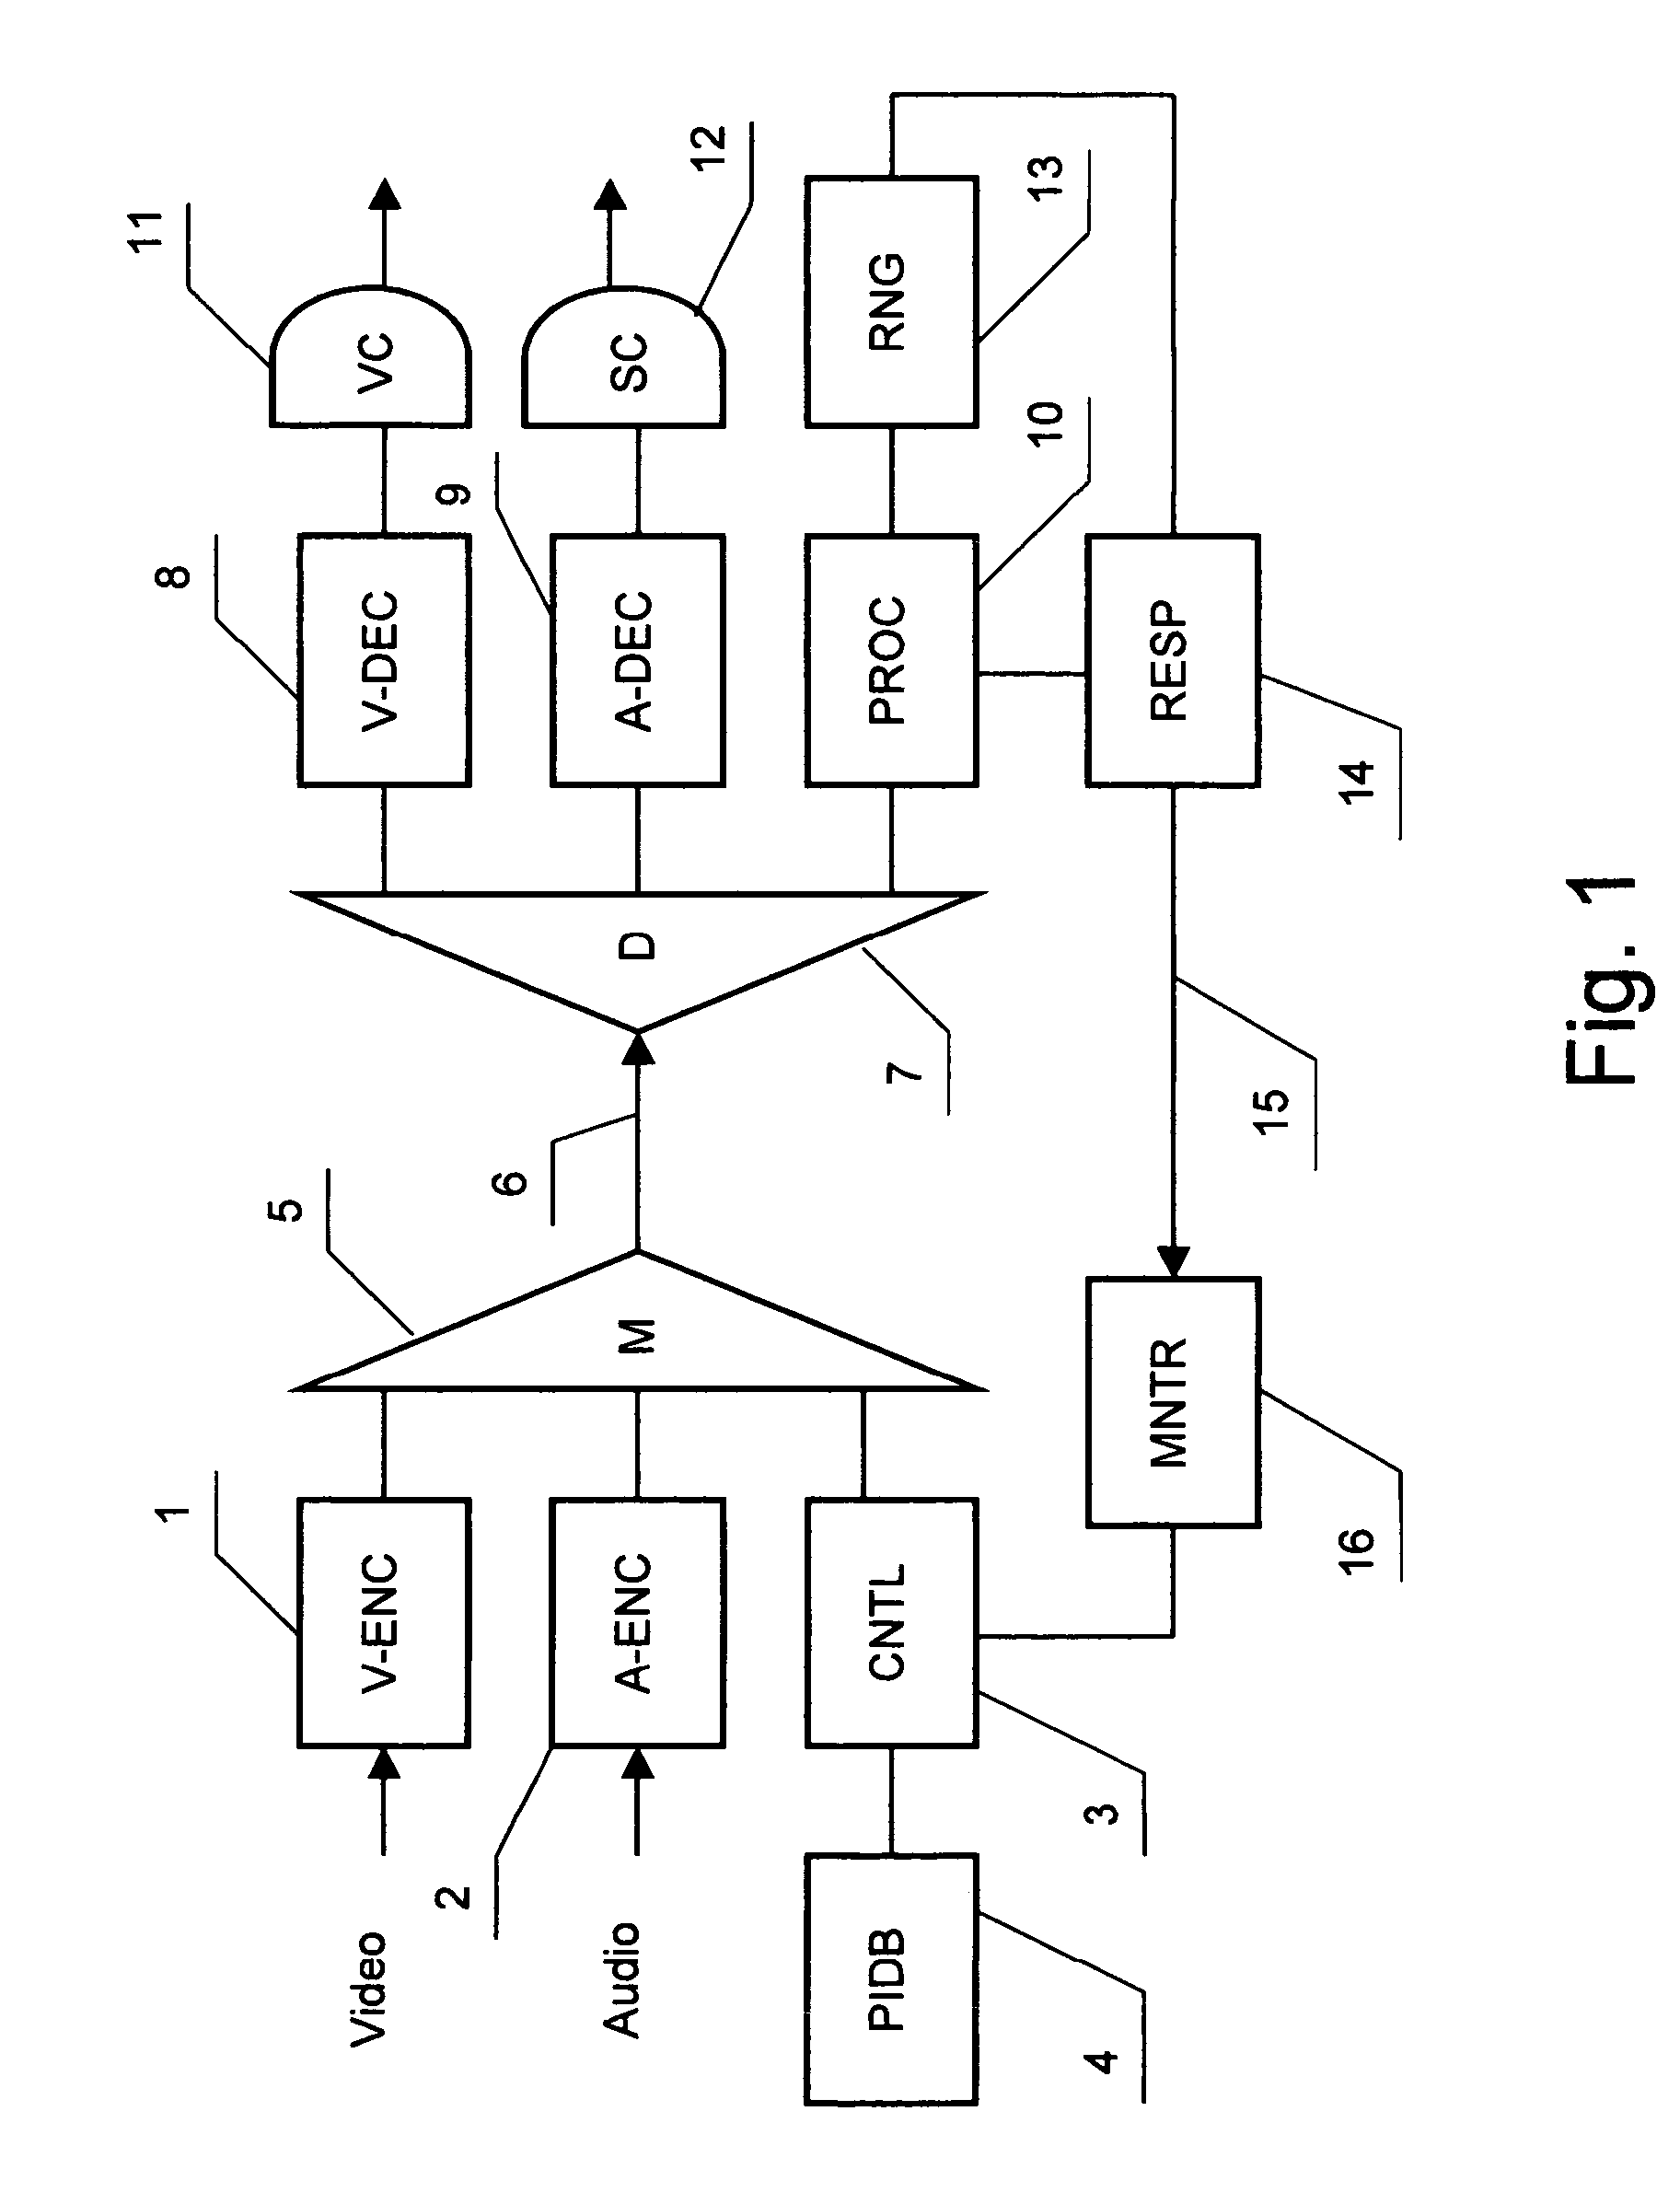 System for estimating audience size in a digital broadcast environment using control packets and predictions